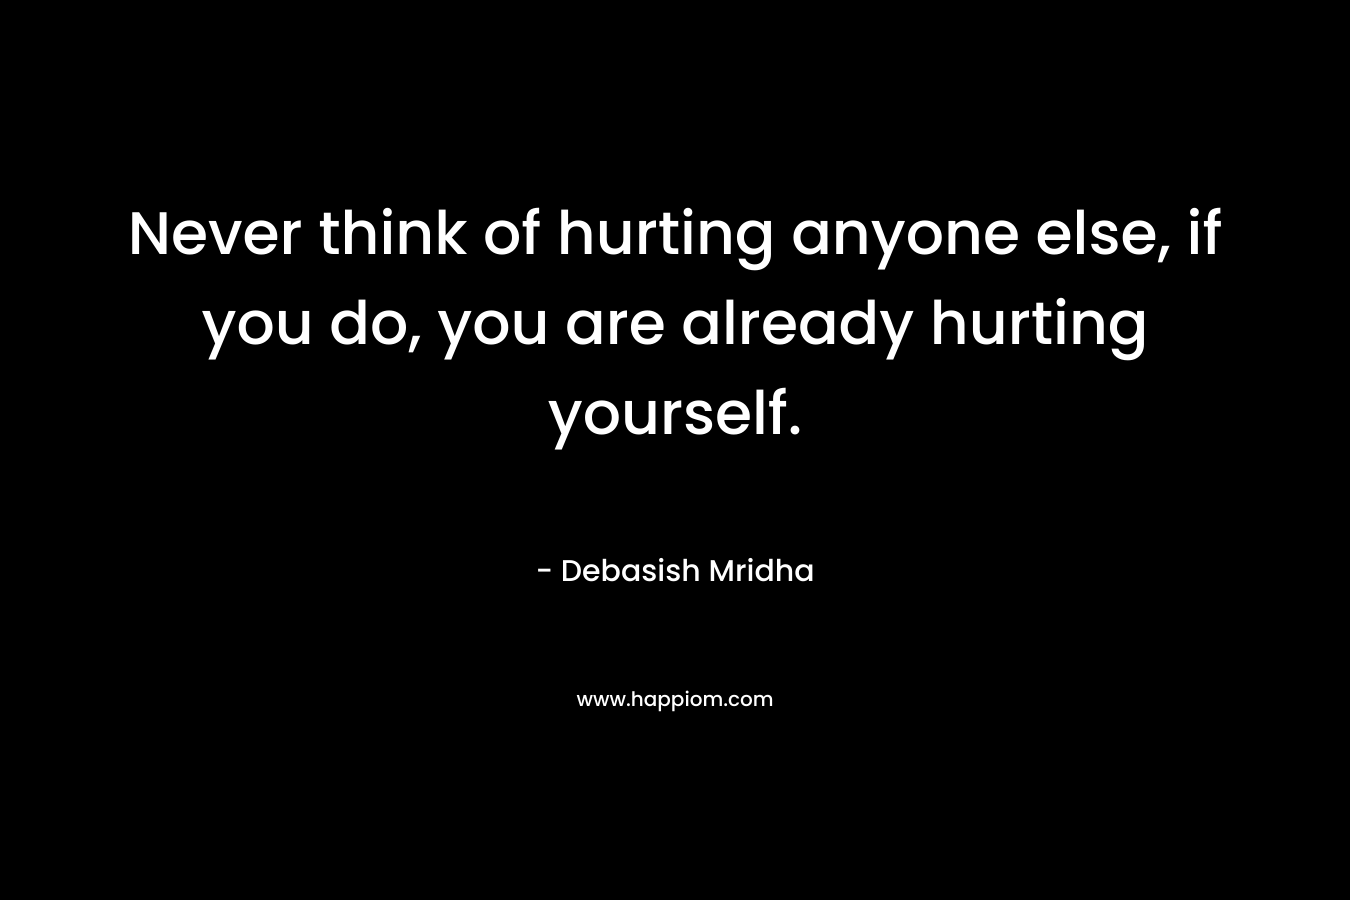 Never think of hurting anyone else, if you do, you are already hurting yourself.